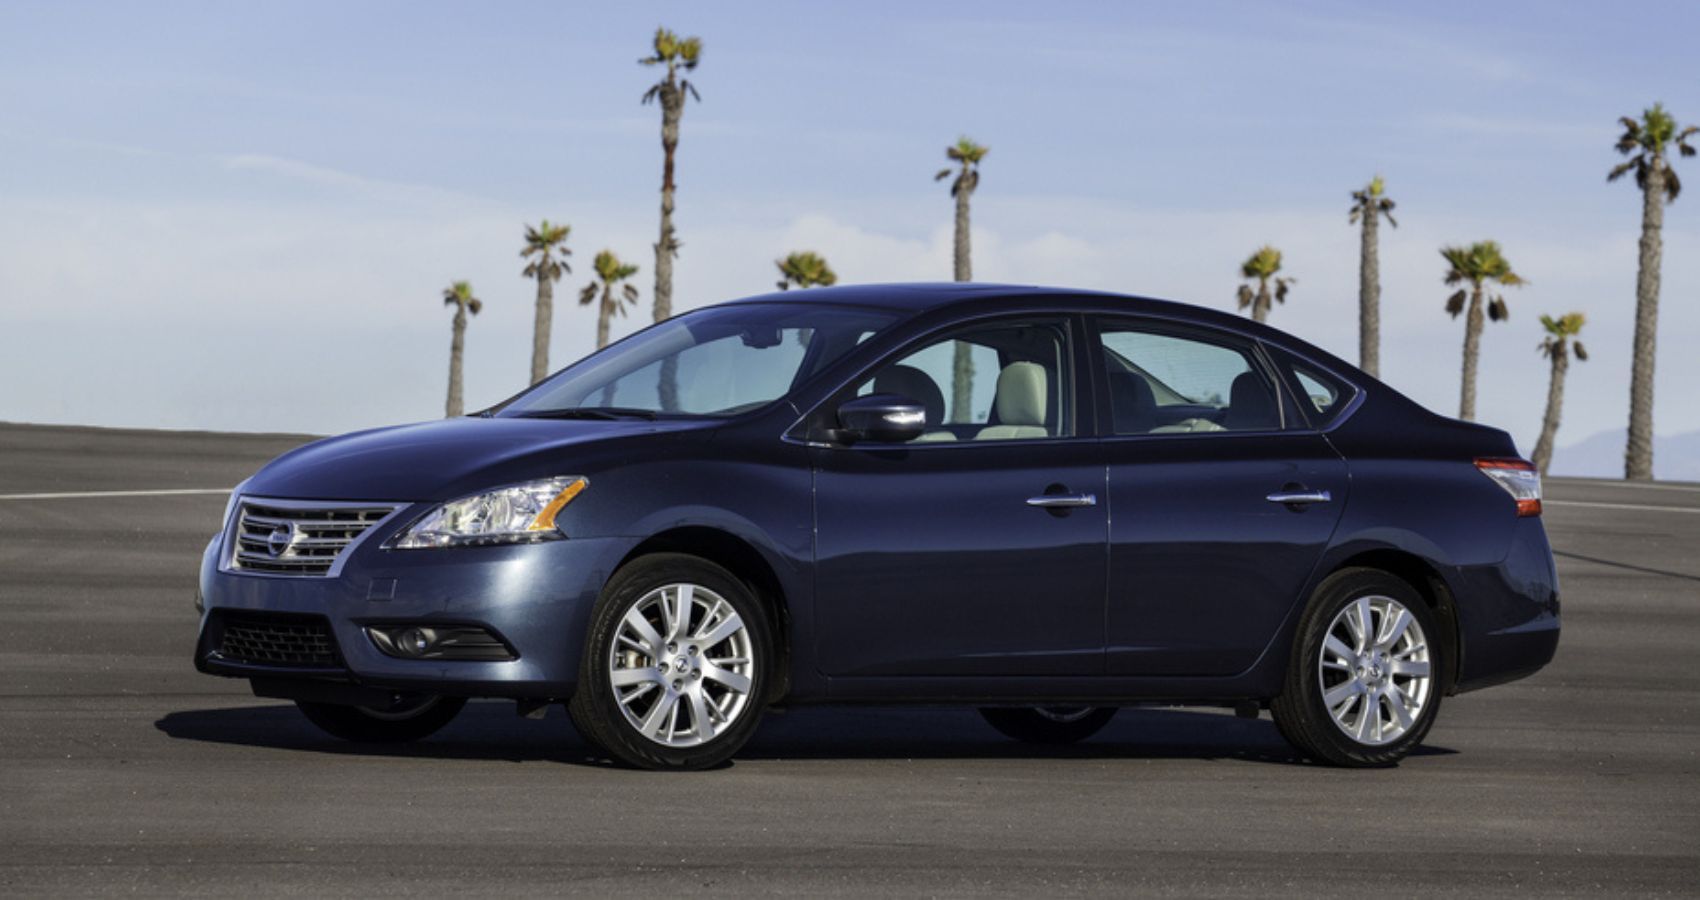 2014 Nissan Sentra Side View in Navy Blue